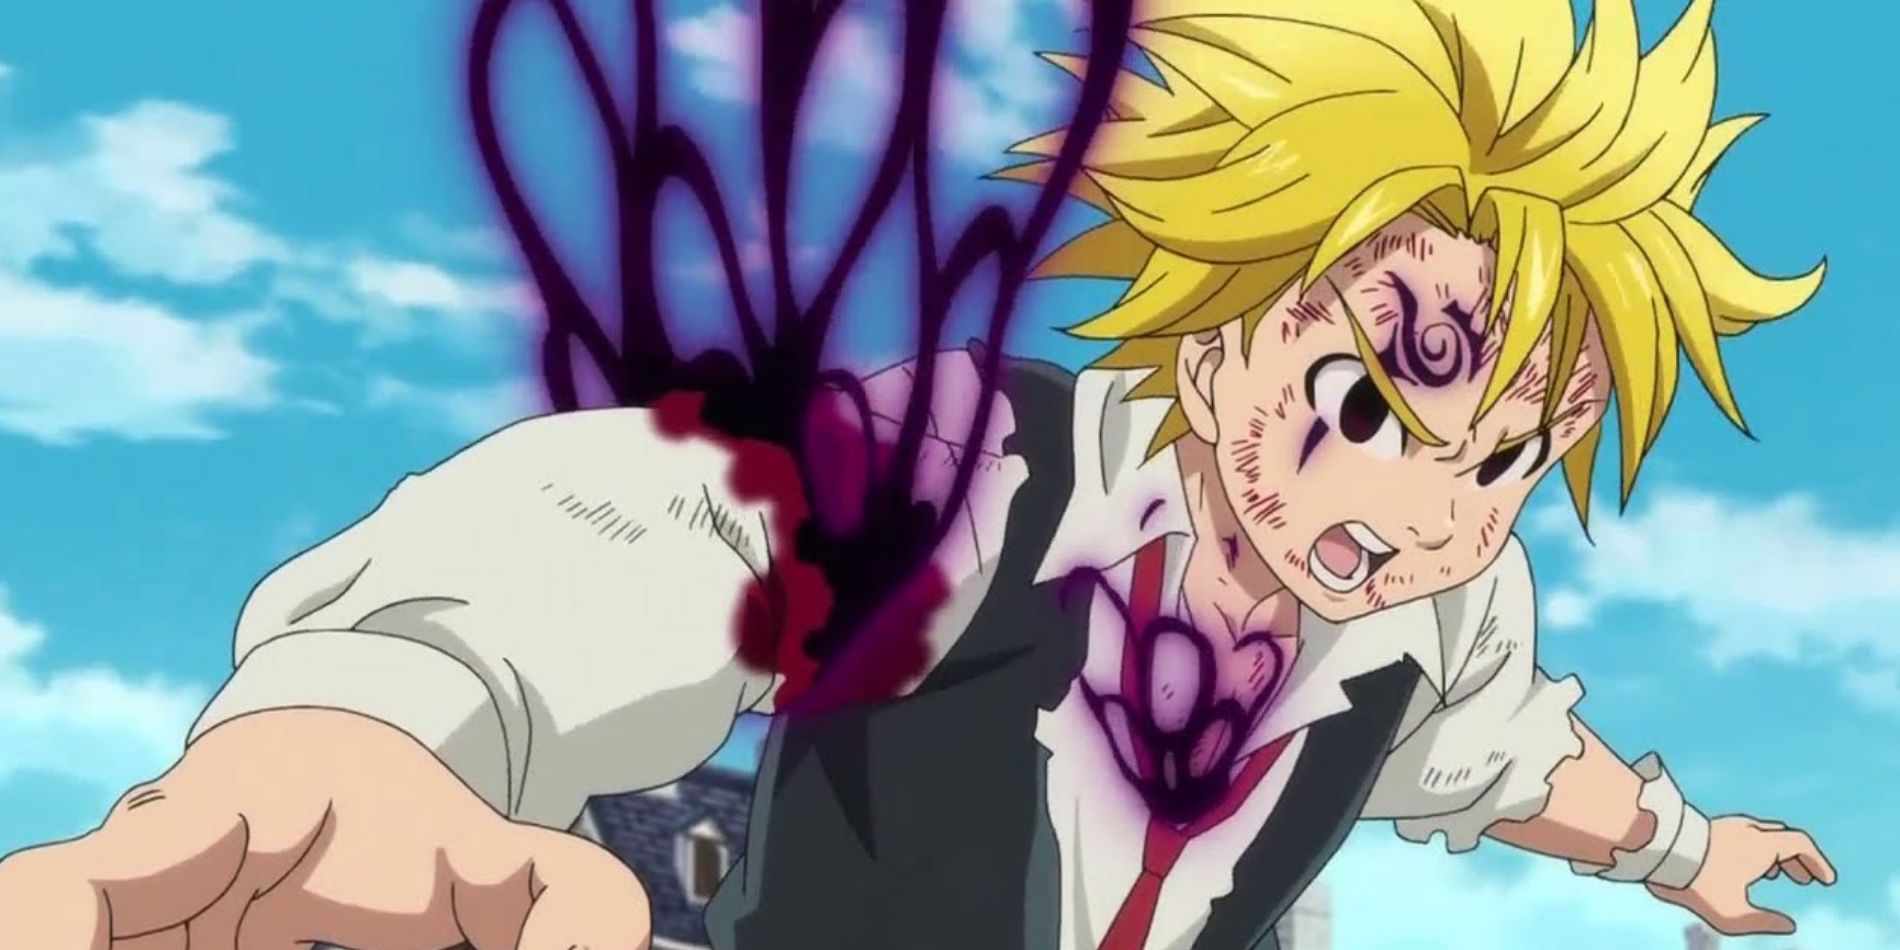 The Dragon’s Sin of Wrath, Meliodas is the son of the Demon King and is as ...